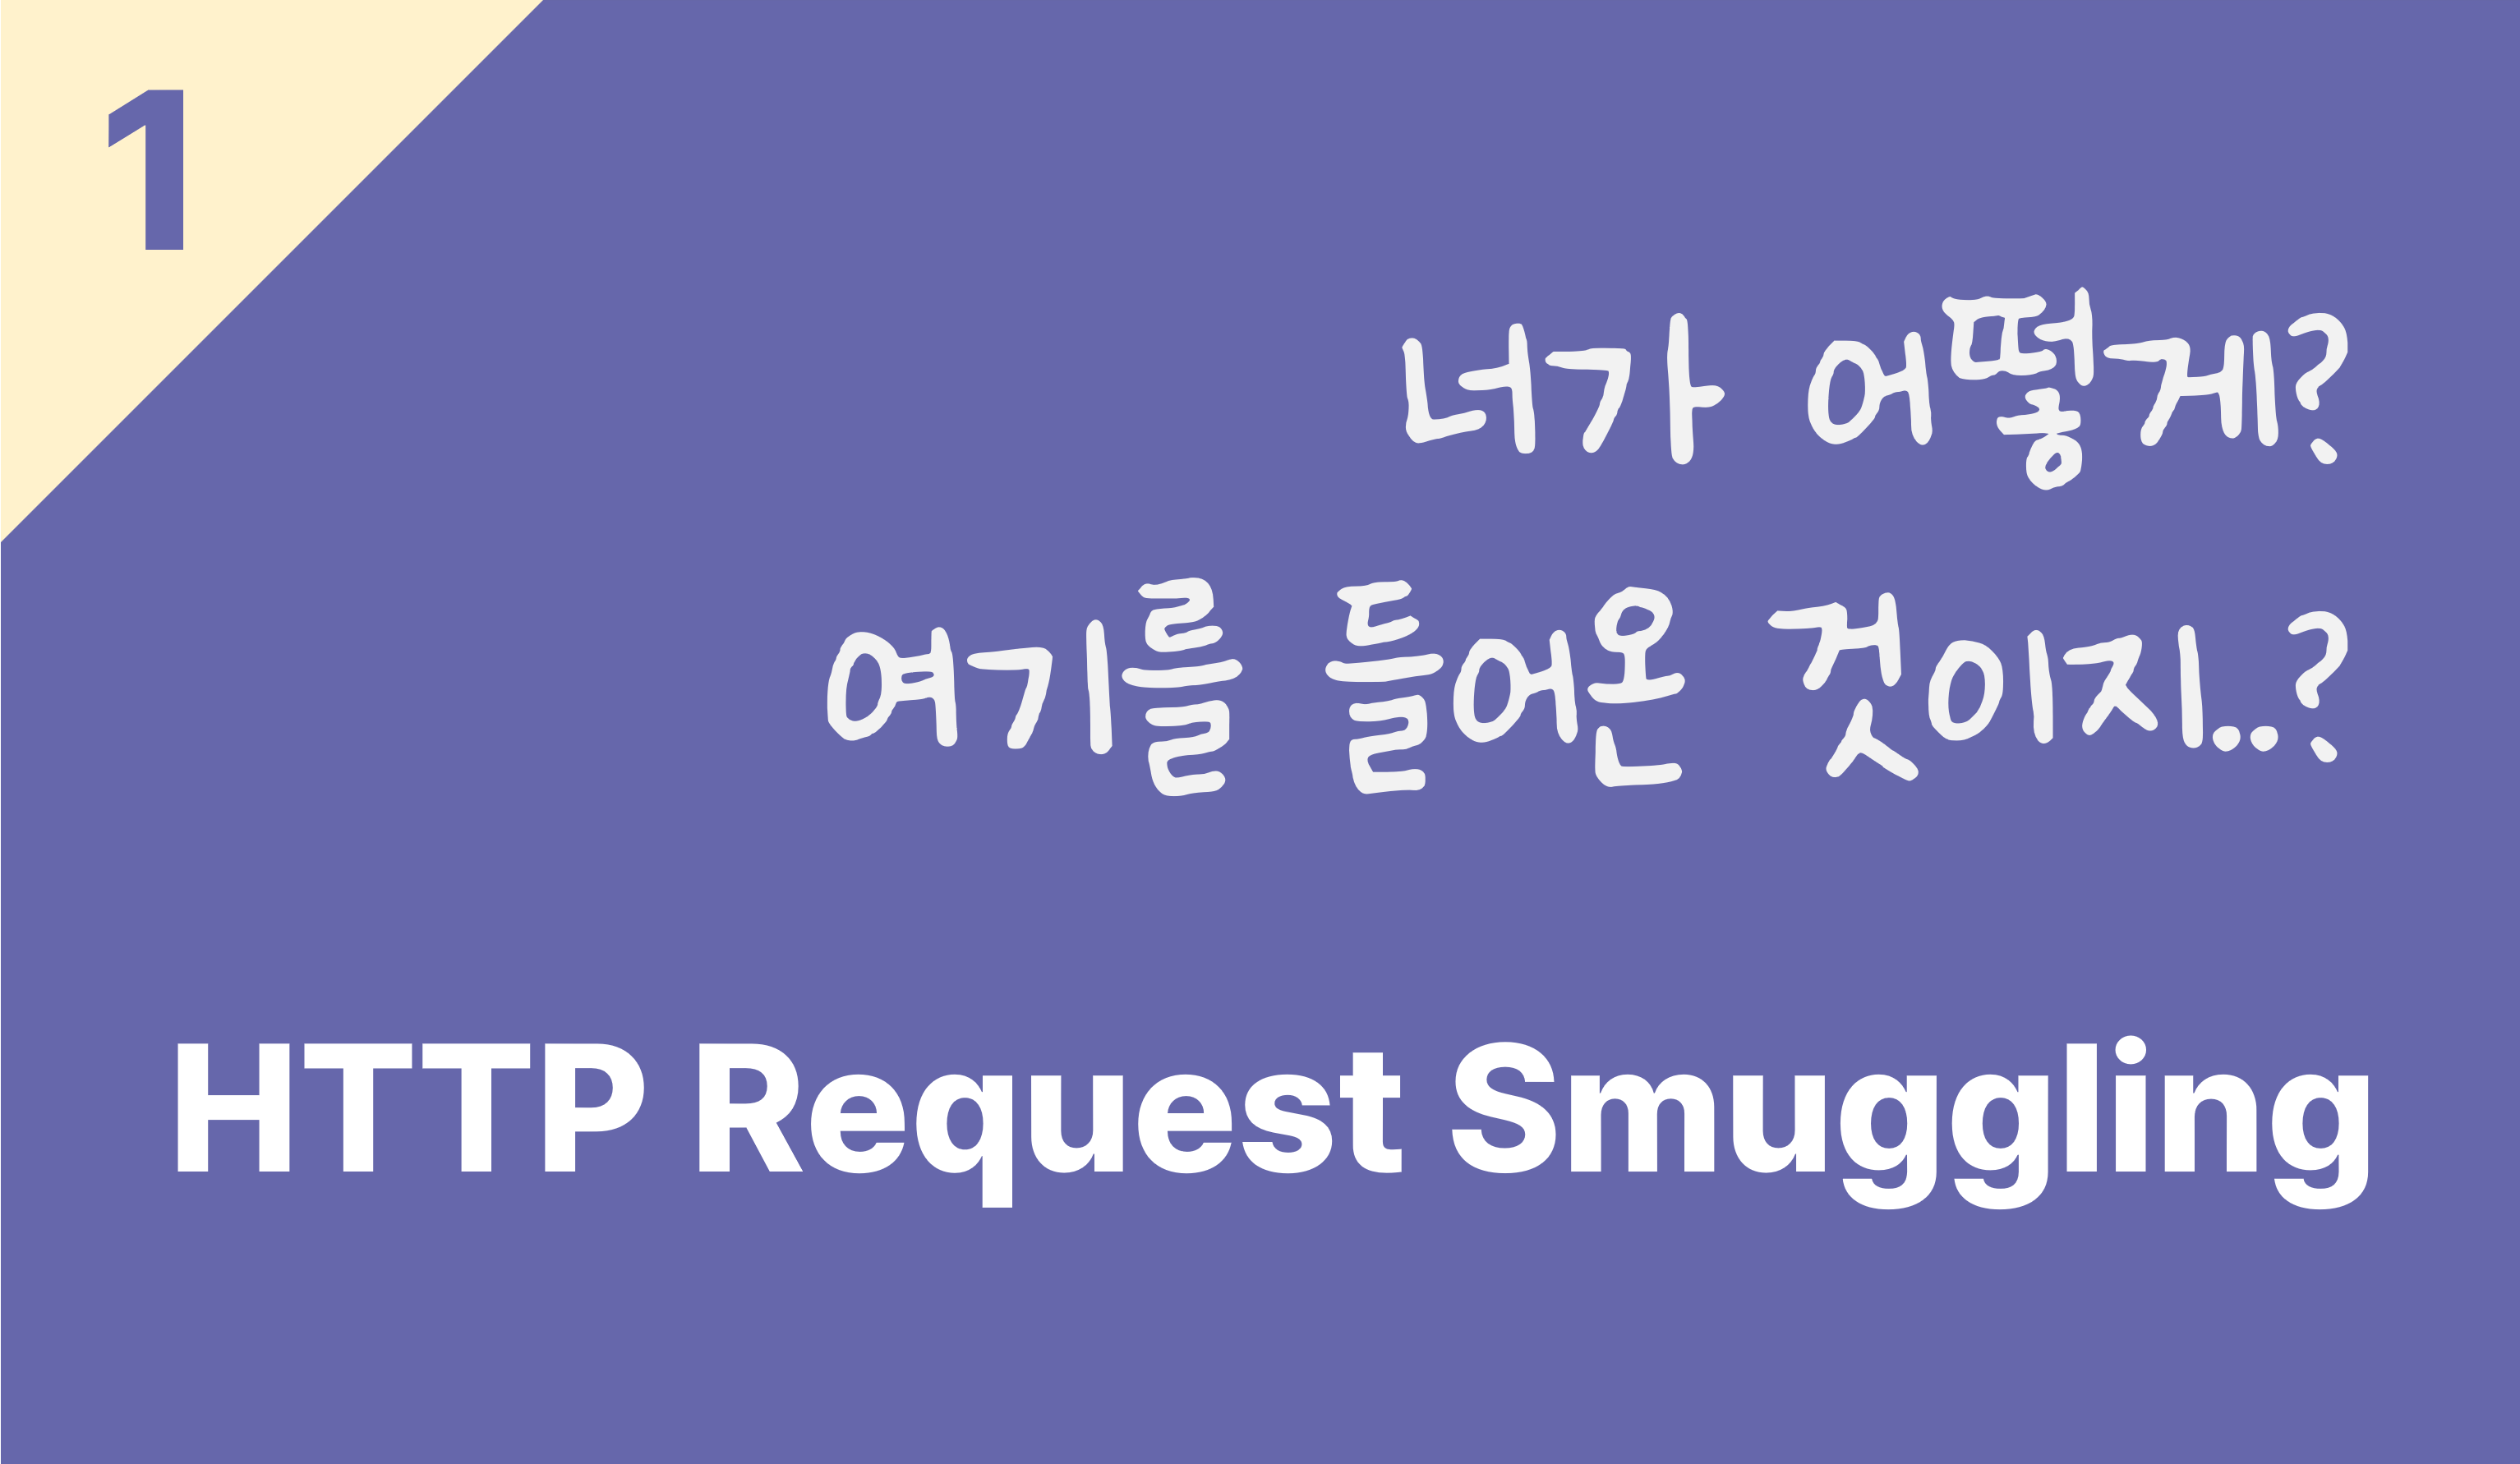 [Research] 재밌는 HTTP Request Smuggling 이야기 (1)